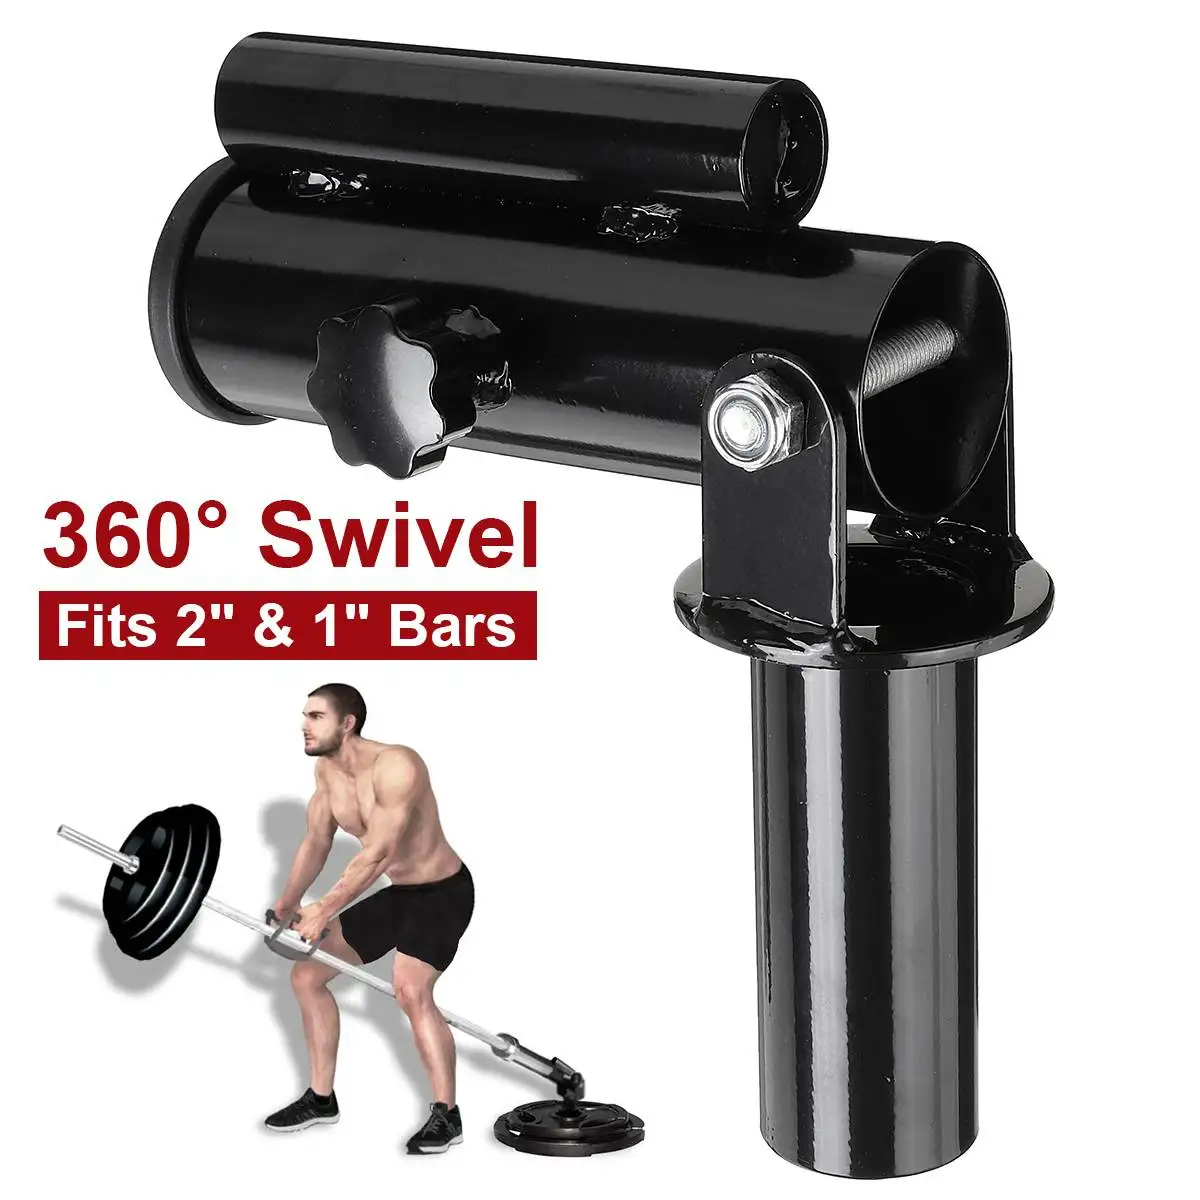 

Barbell Attachment Gym Home Fitness T-bar Row Plate Post Insert Landmines Squat Deadlift Core Strength Trainer